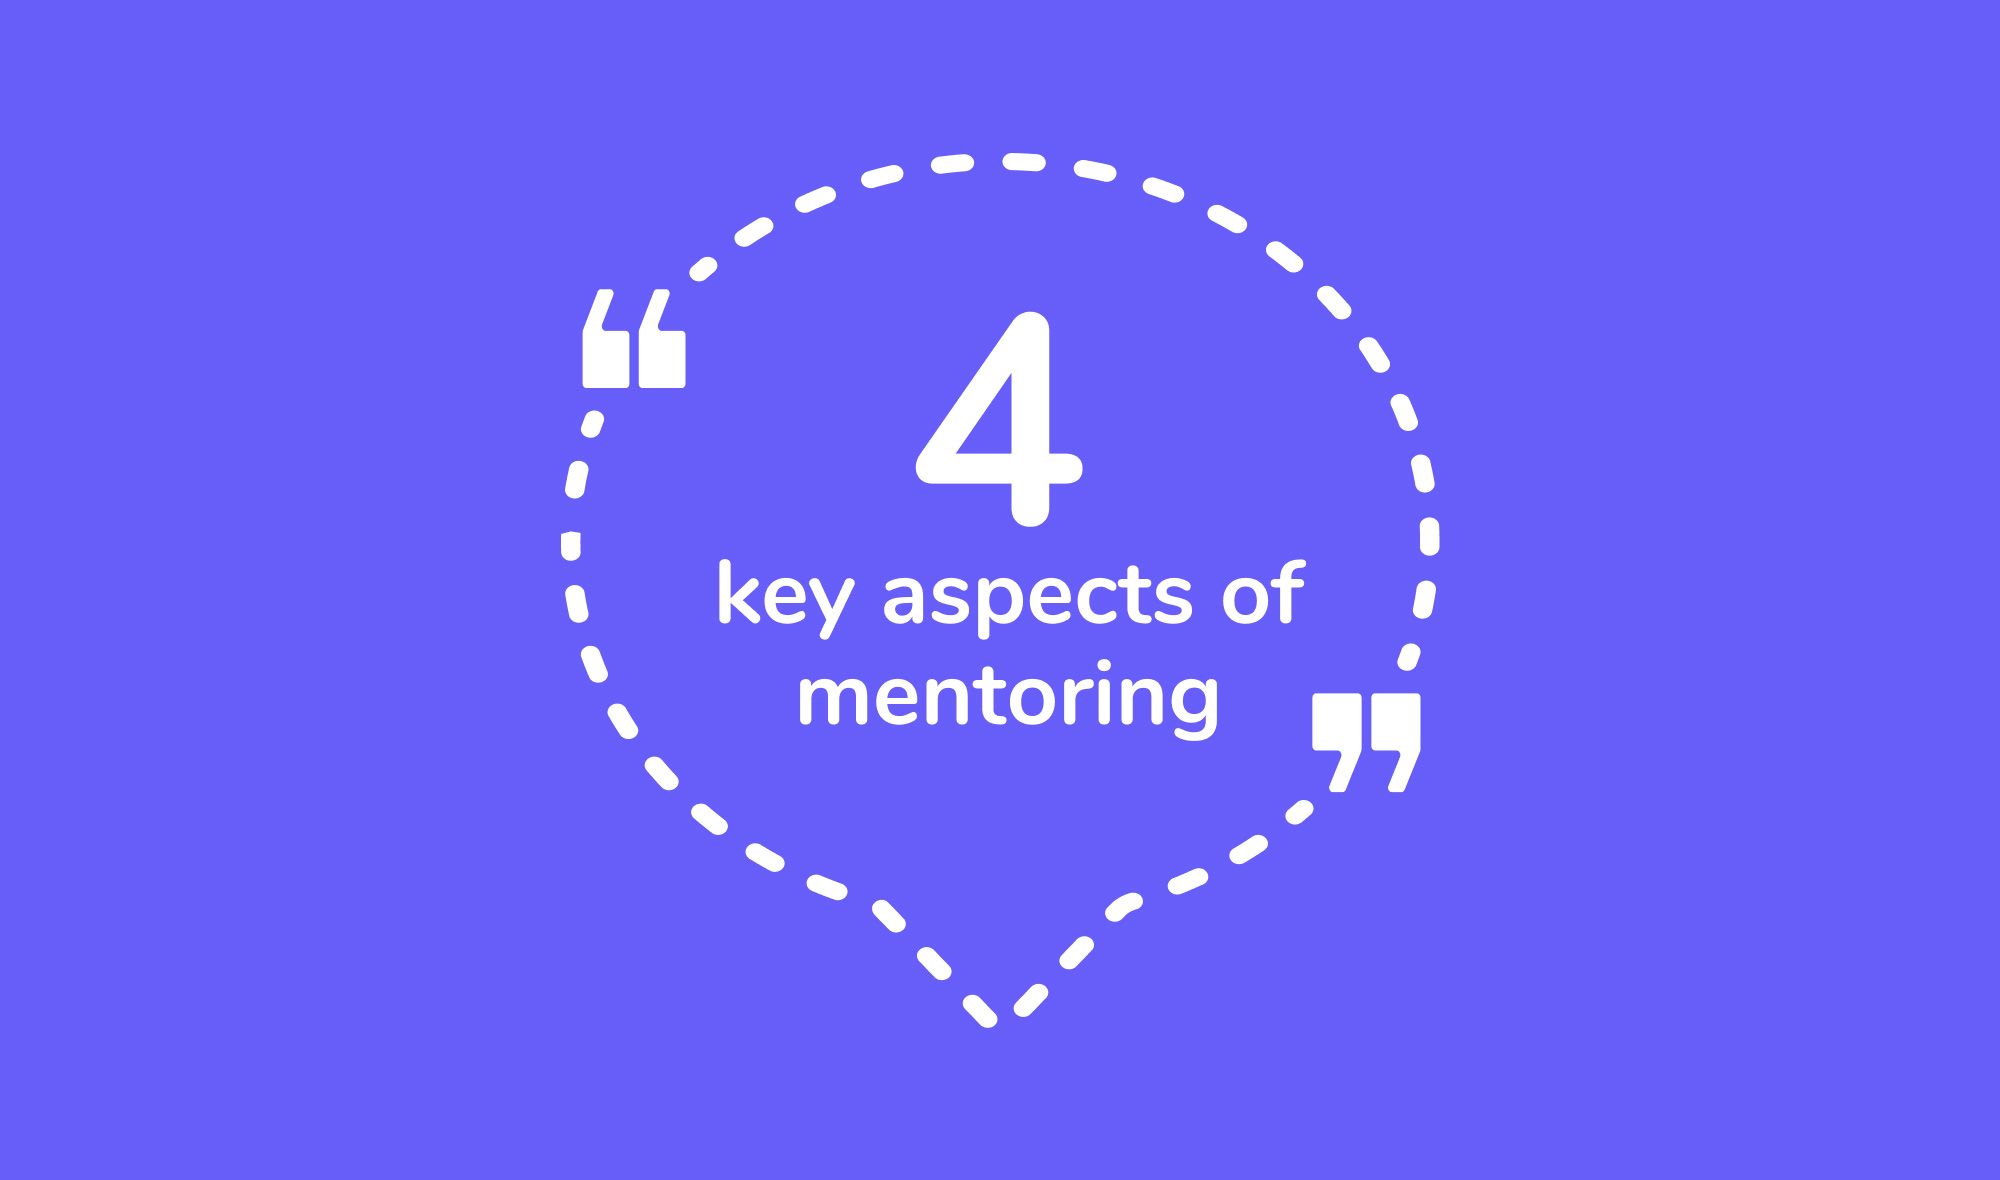 Which of the following statements about mentoring is true? - What are the 4 key aspects of a mentoring relationship?